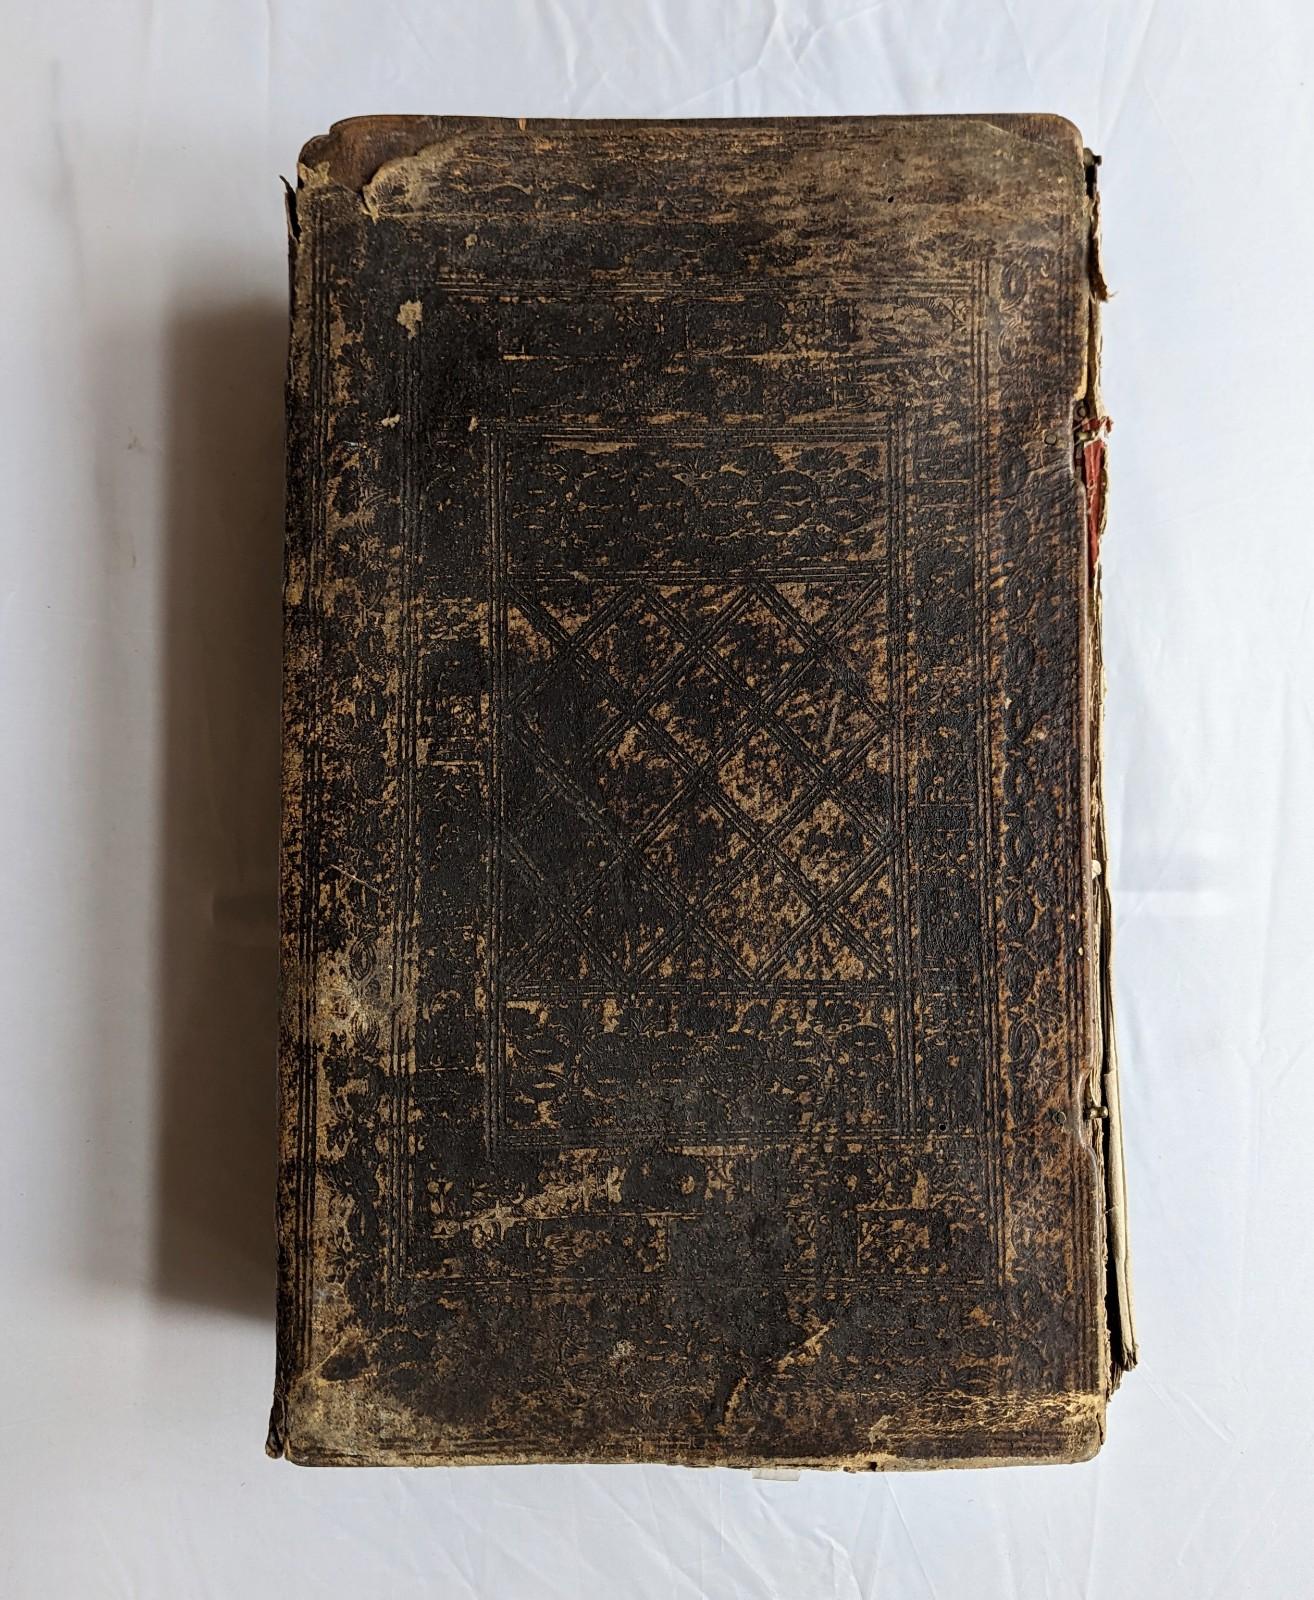 Collectible antique German Luther Bible, also known as 